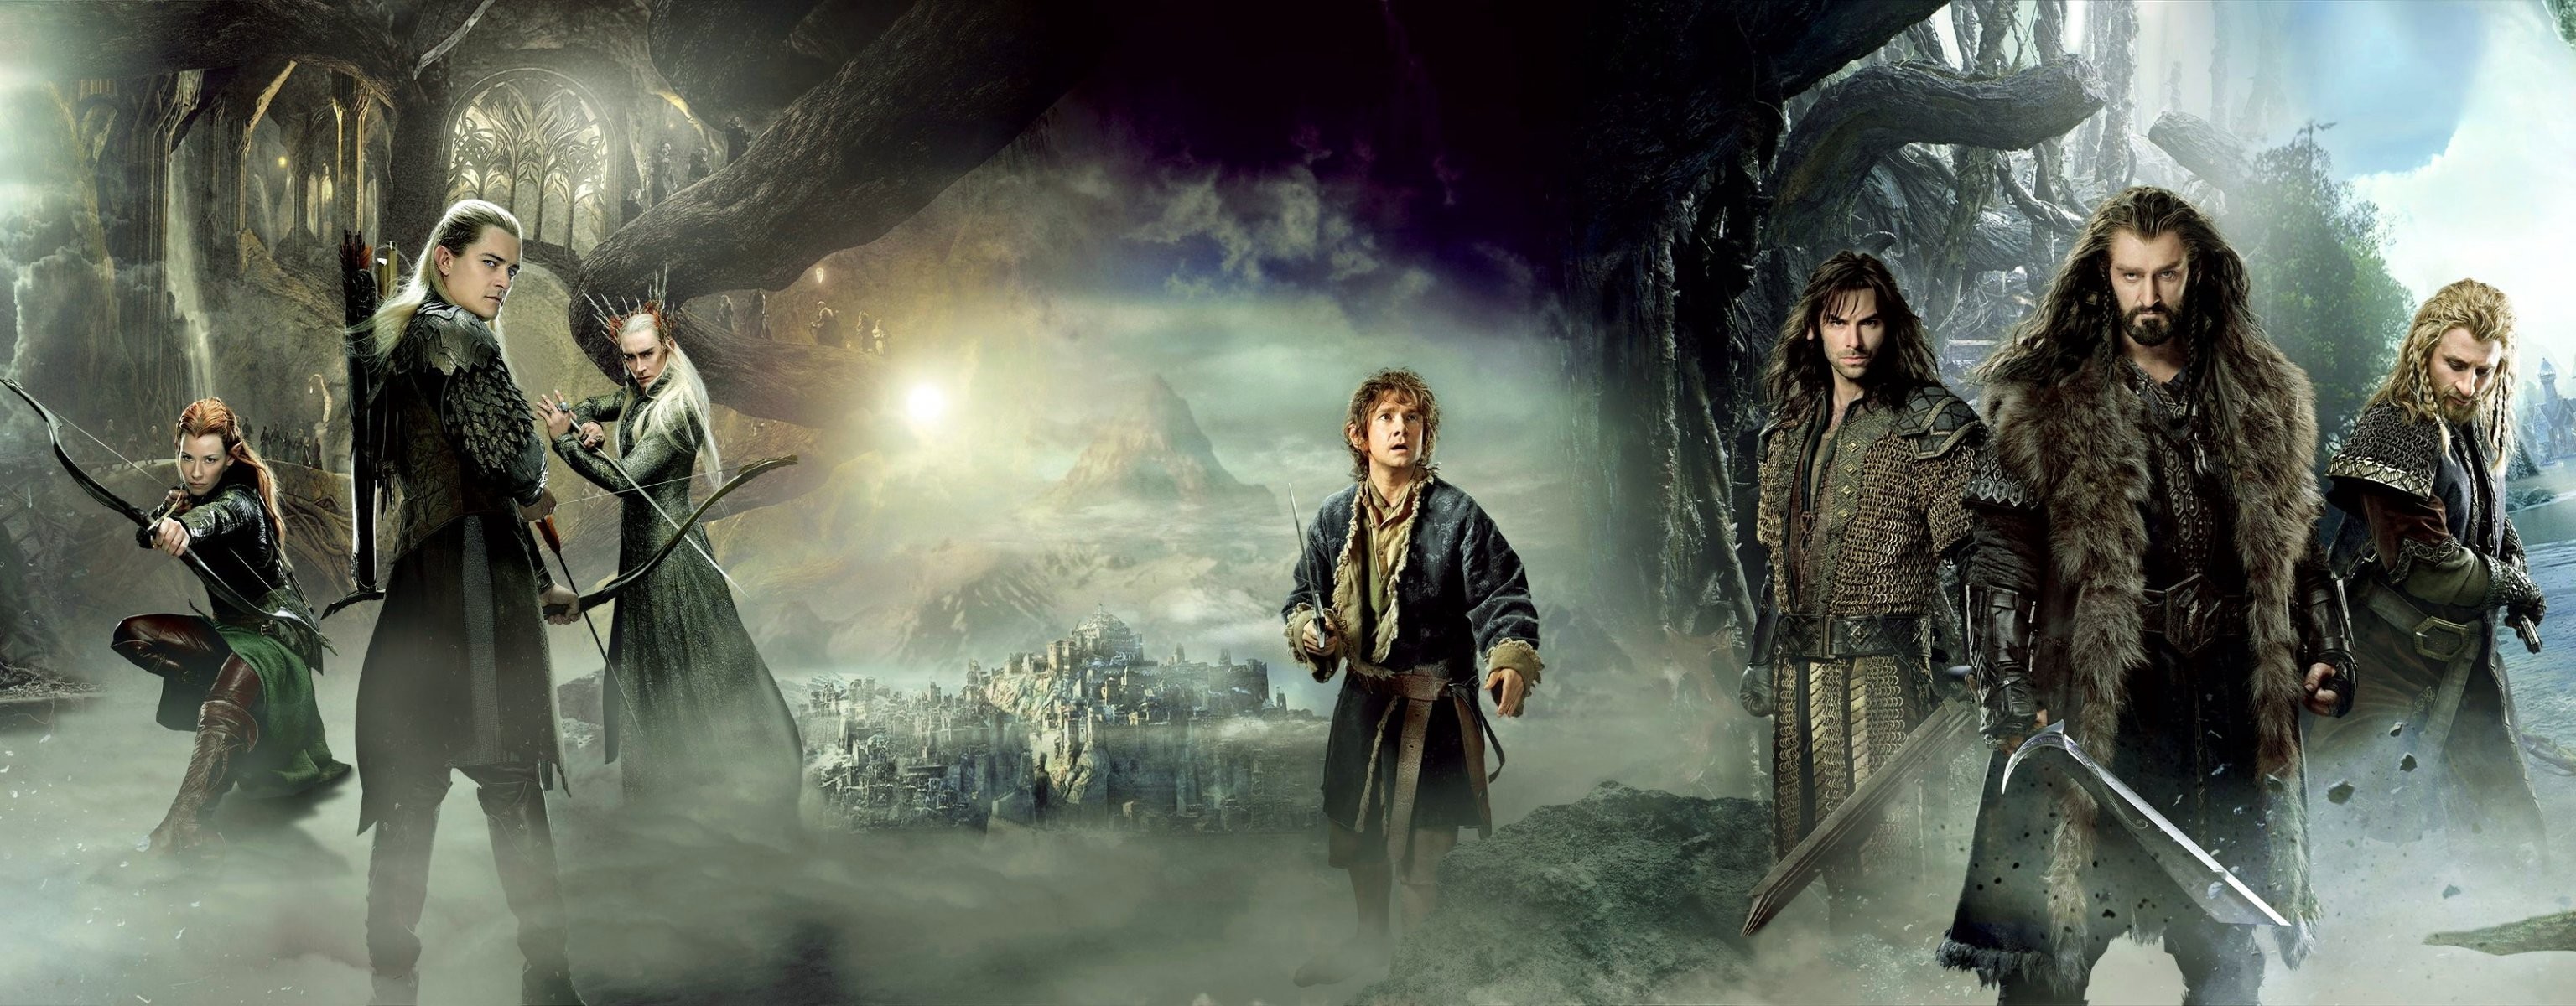 3072x1200 the hobbit or there and back again the hobbit: the desolation of smaug  dwarves thorin